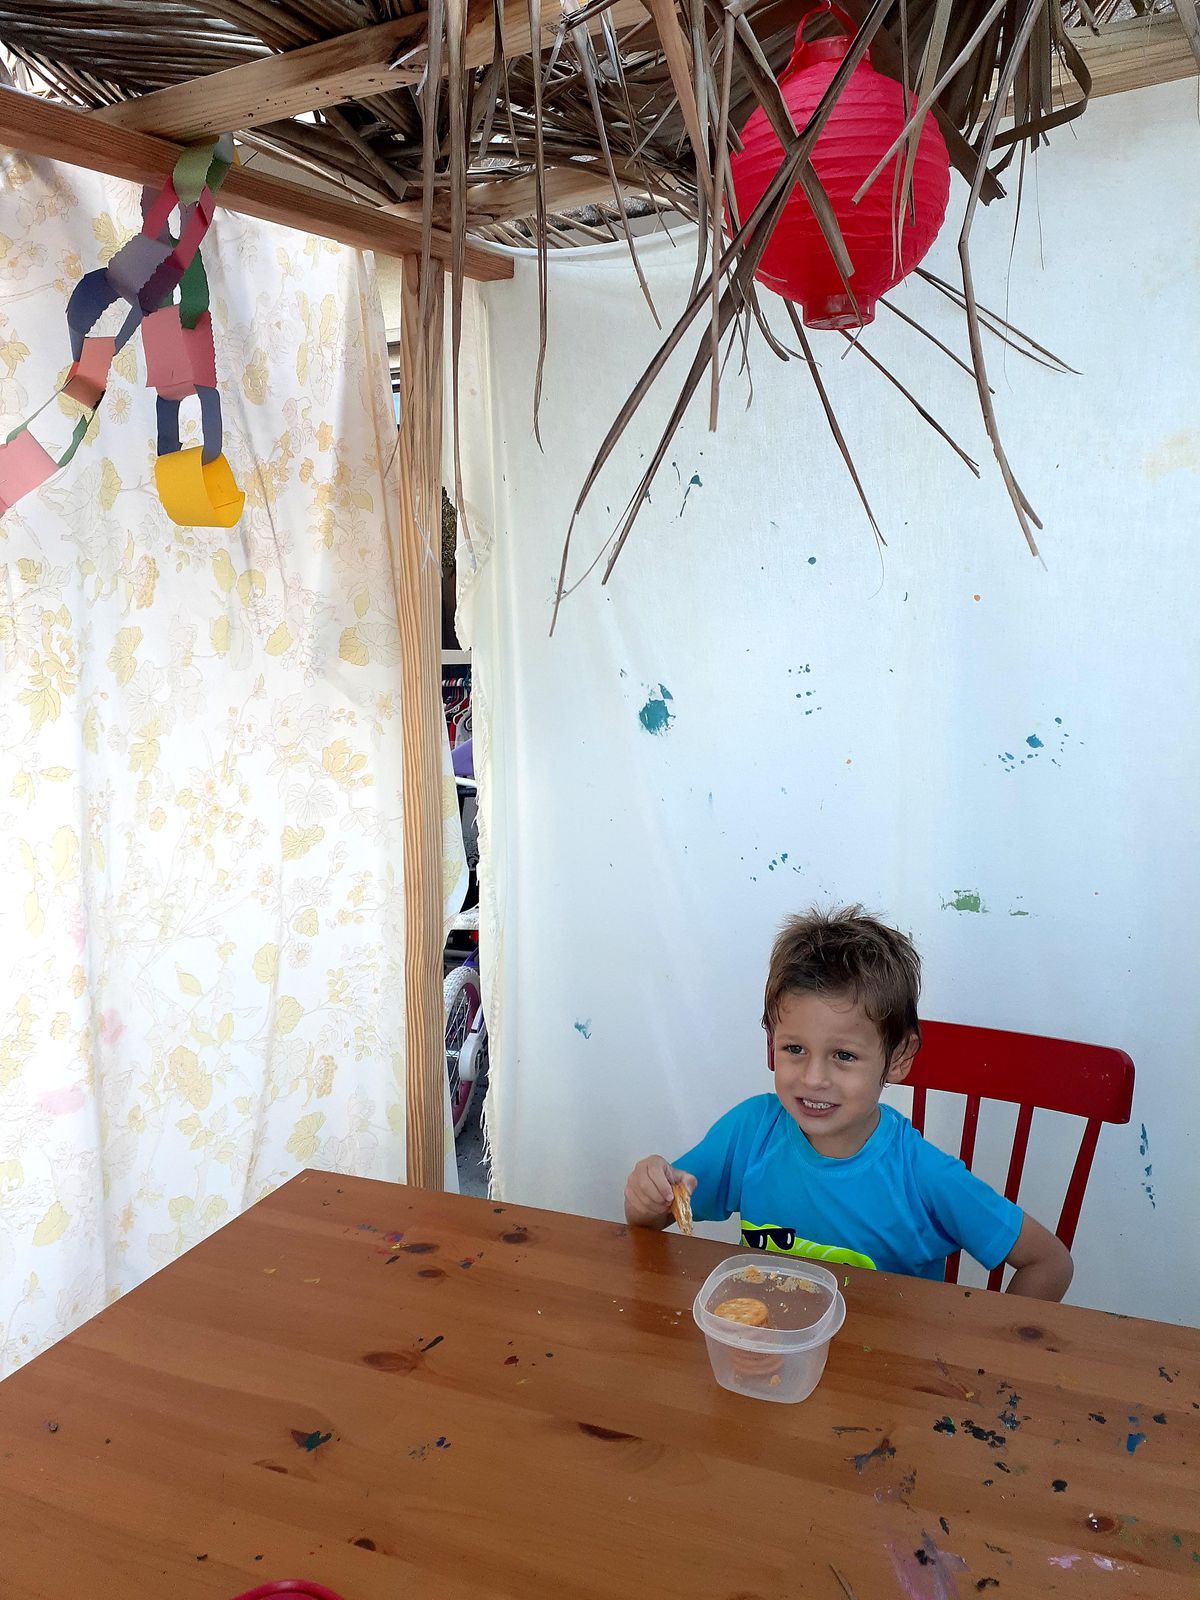 Mya Jaradat's son has a snack at a sukkah, a temporary structure built by Jews to commemorate Shukkot, at the family's home in Florida on Thursday, September 30, 2021.